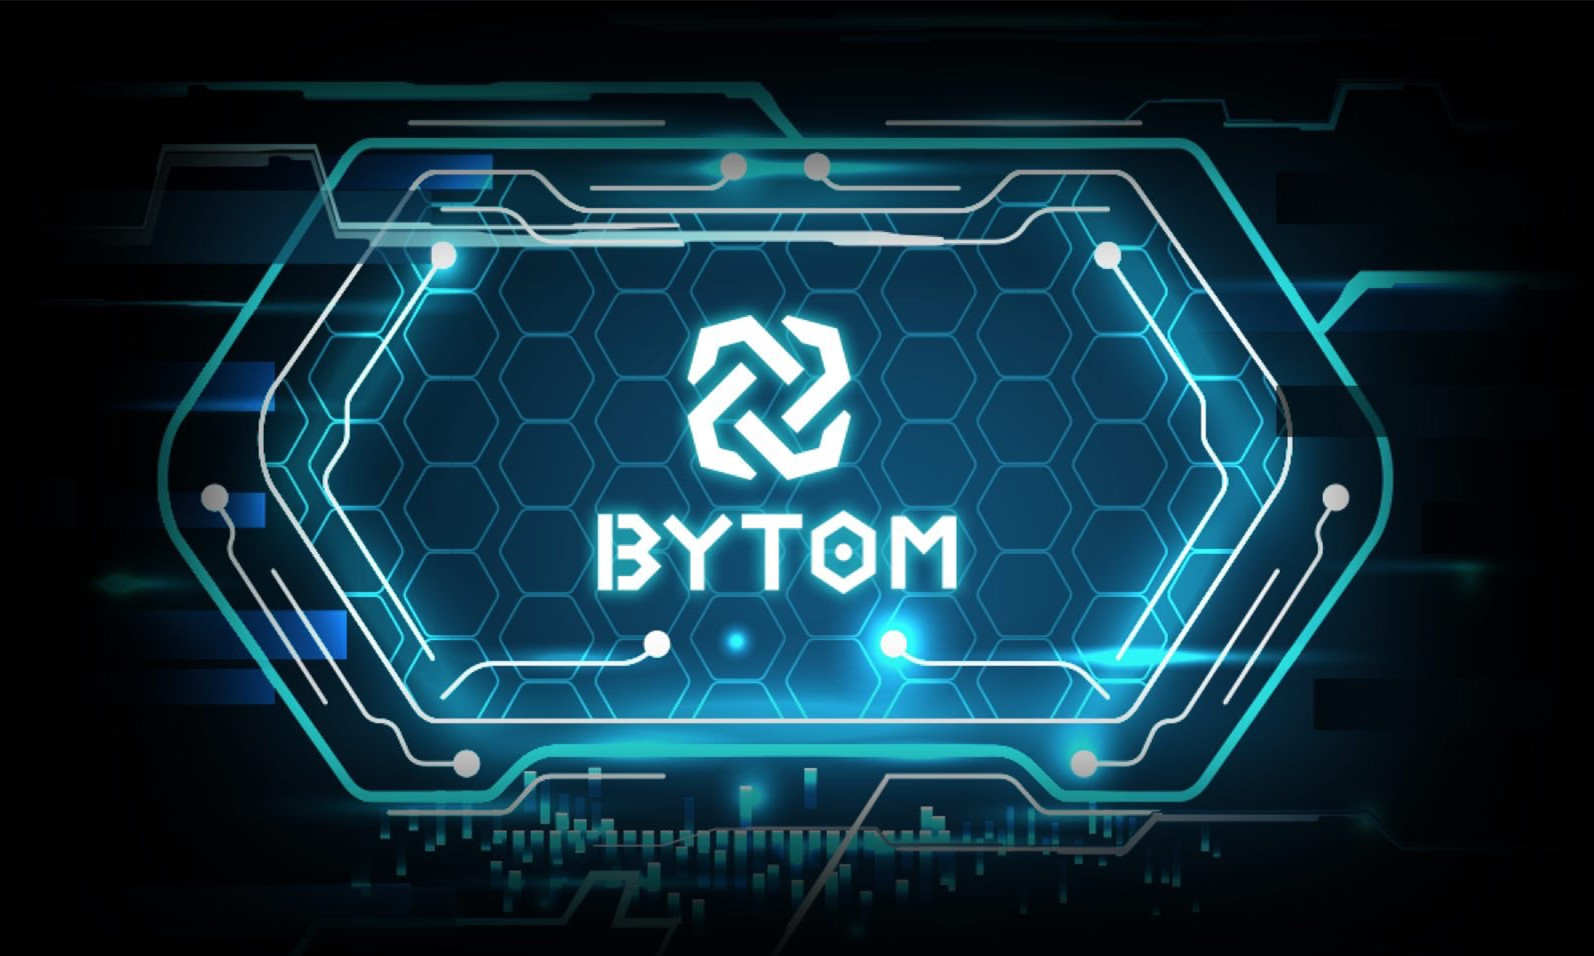 Https steemit.com cryptocurrency purpleblob anyone-here-investing-in-bytom free electricity crypto mining